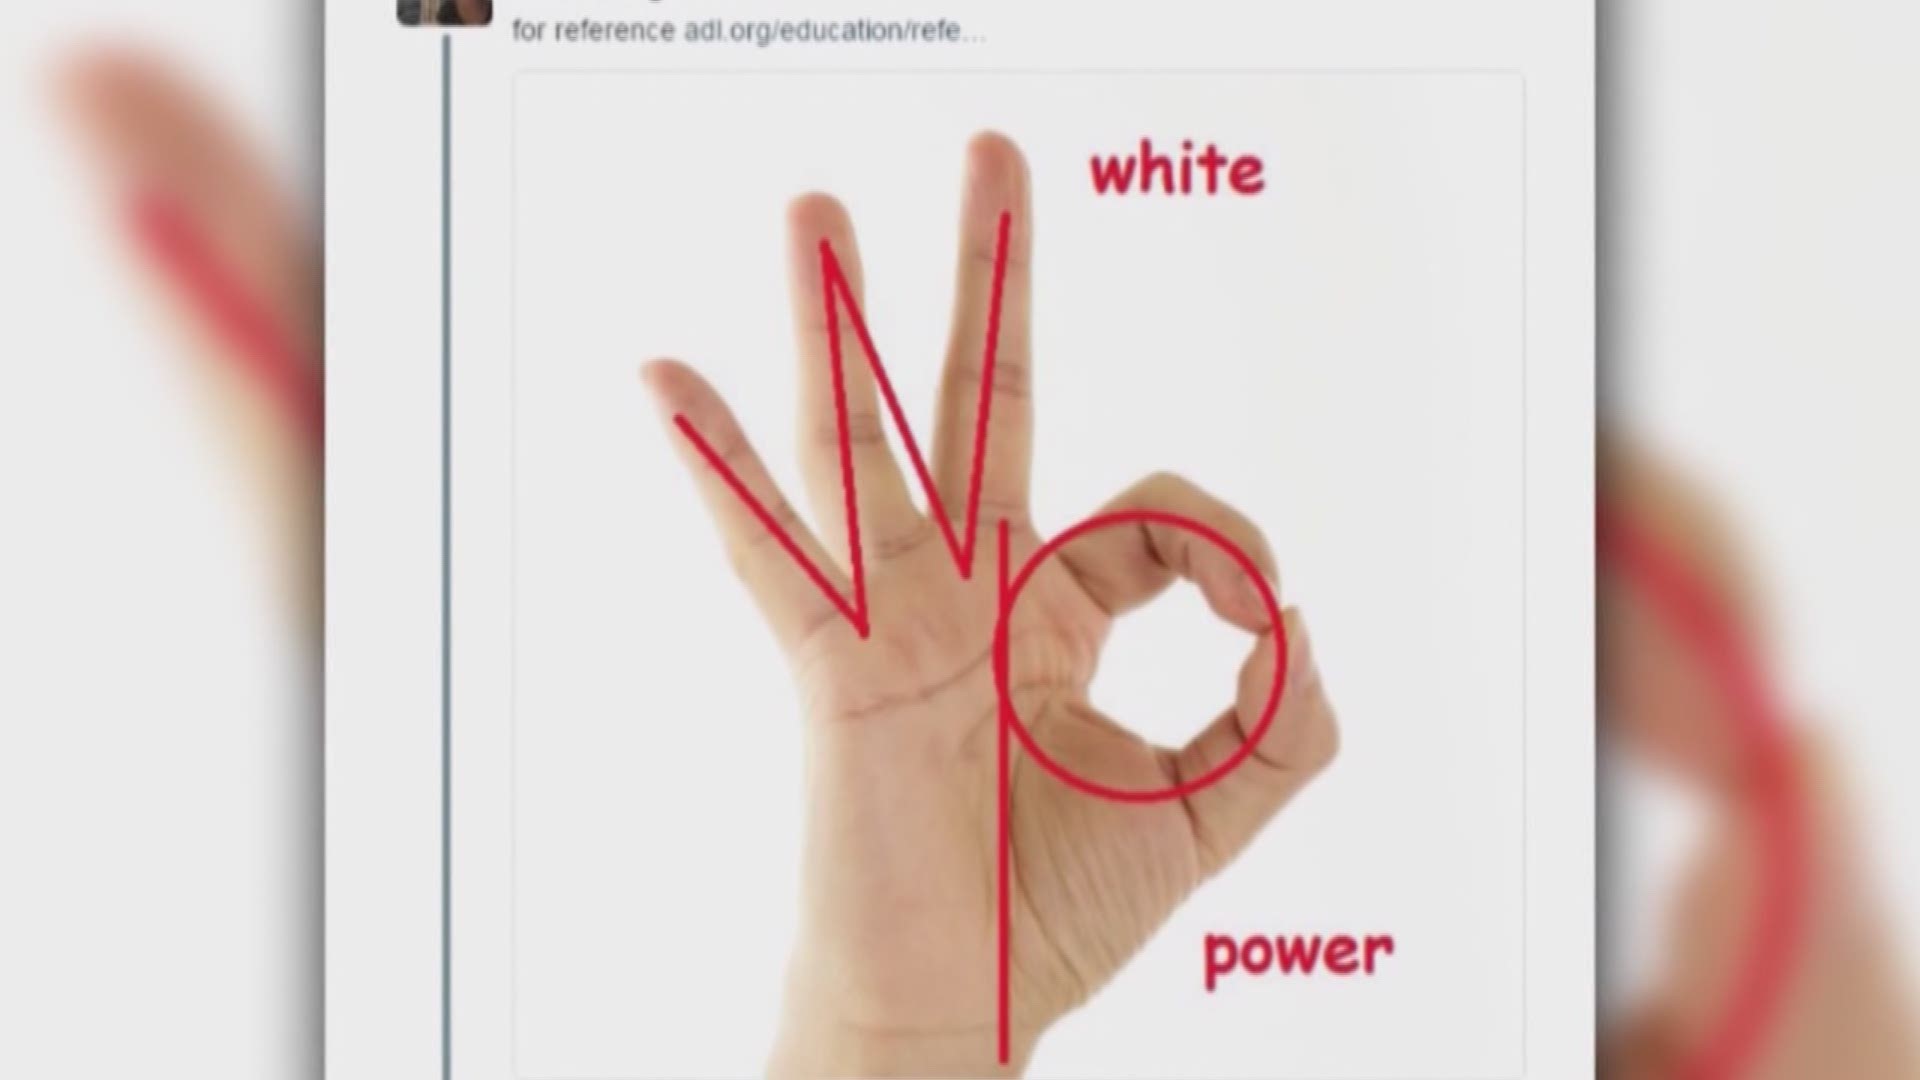 You may have seen some claims on social media lately that the "OK" sign is a hate symbol used to say "White Power."